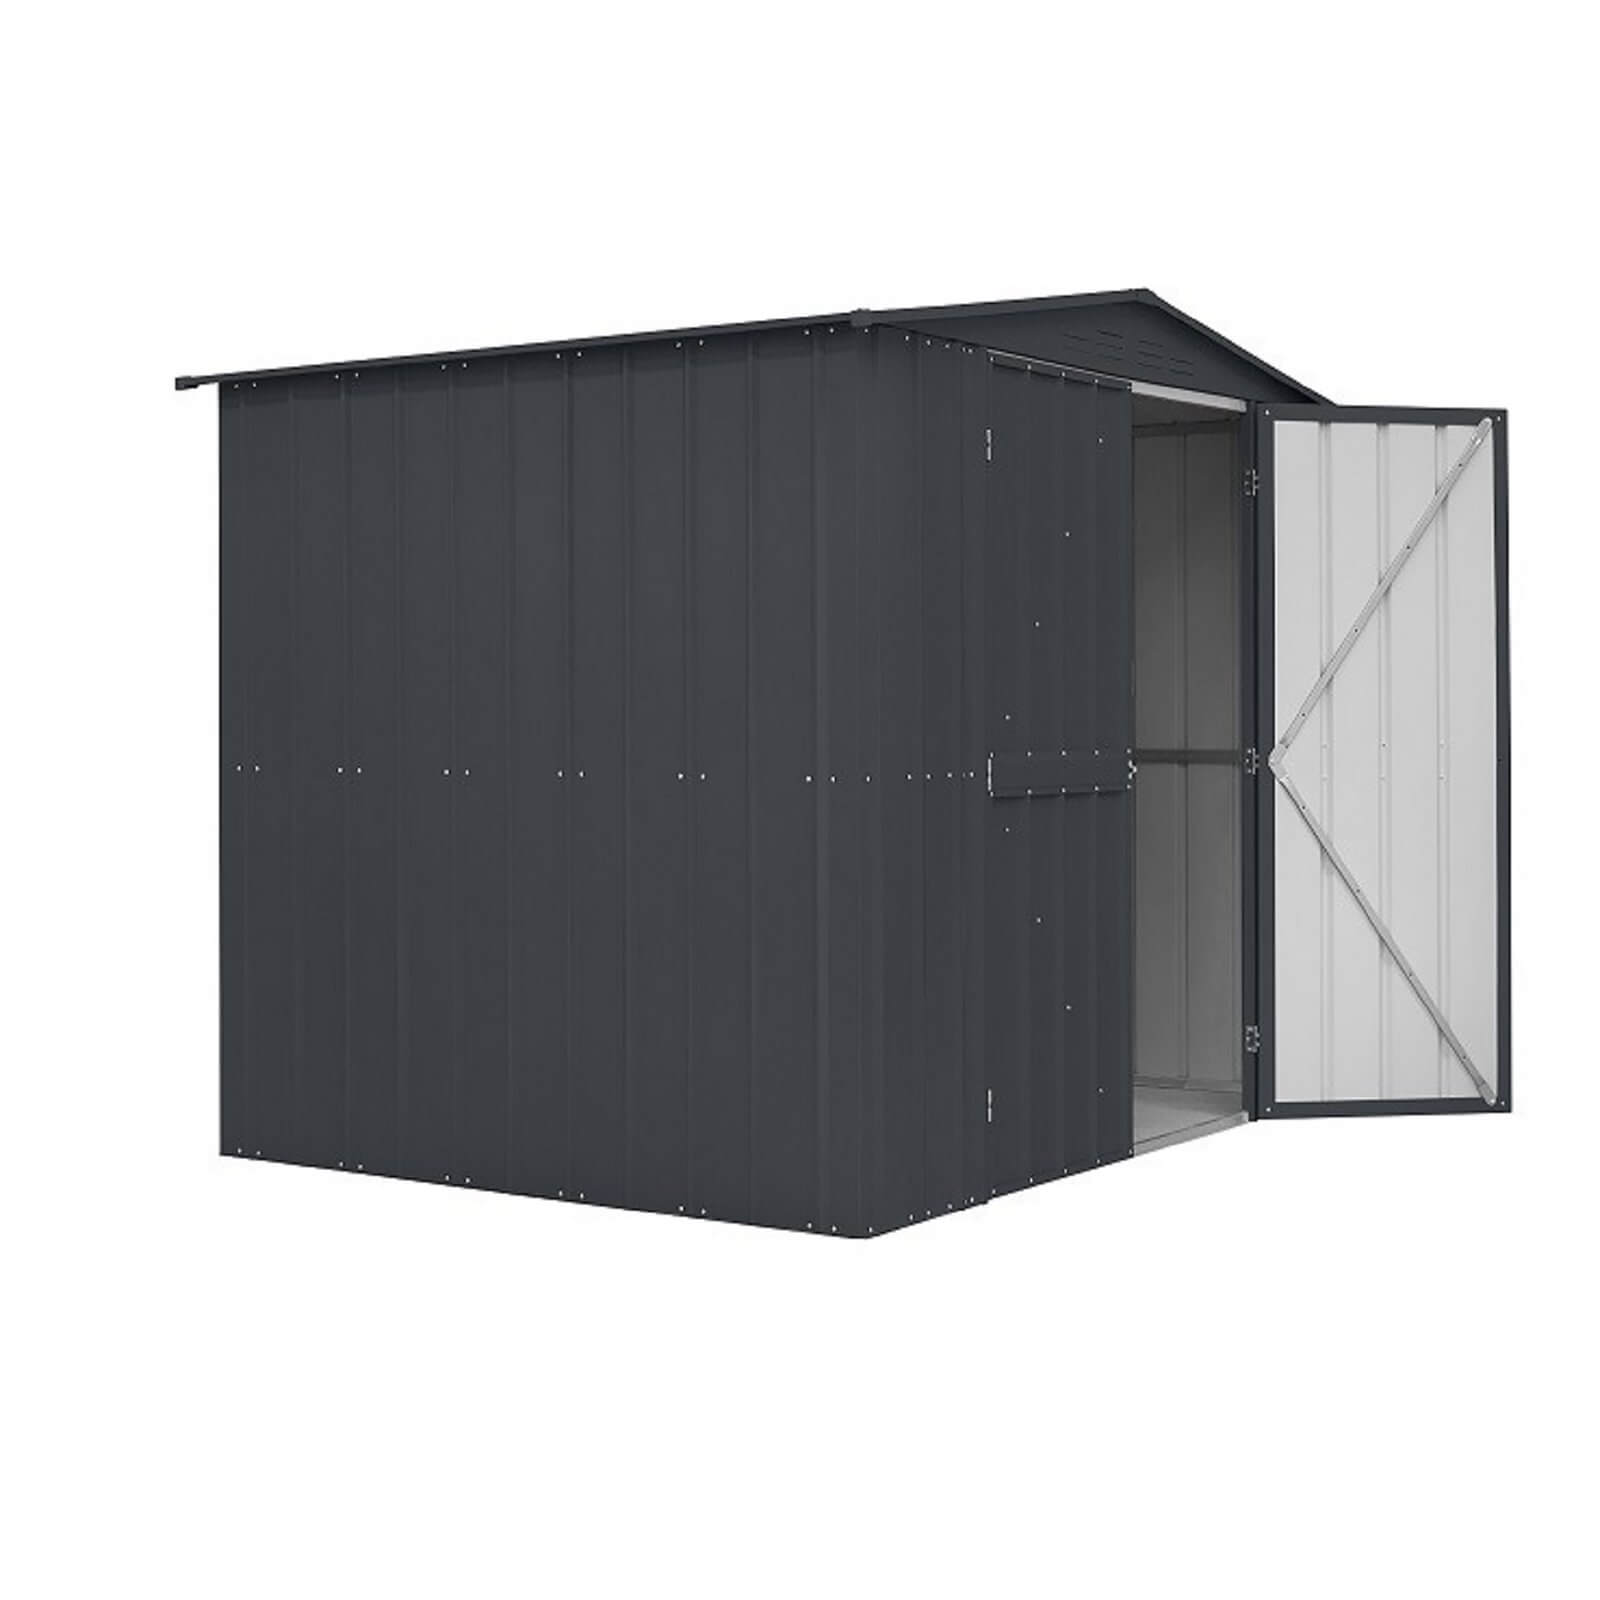 Lotus 8x6ft Mobility Metal Shed - Anthracite Grey